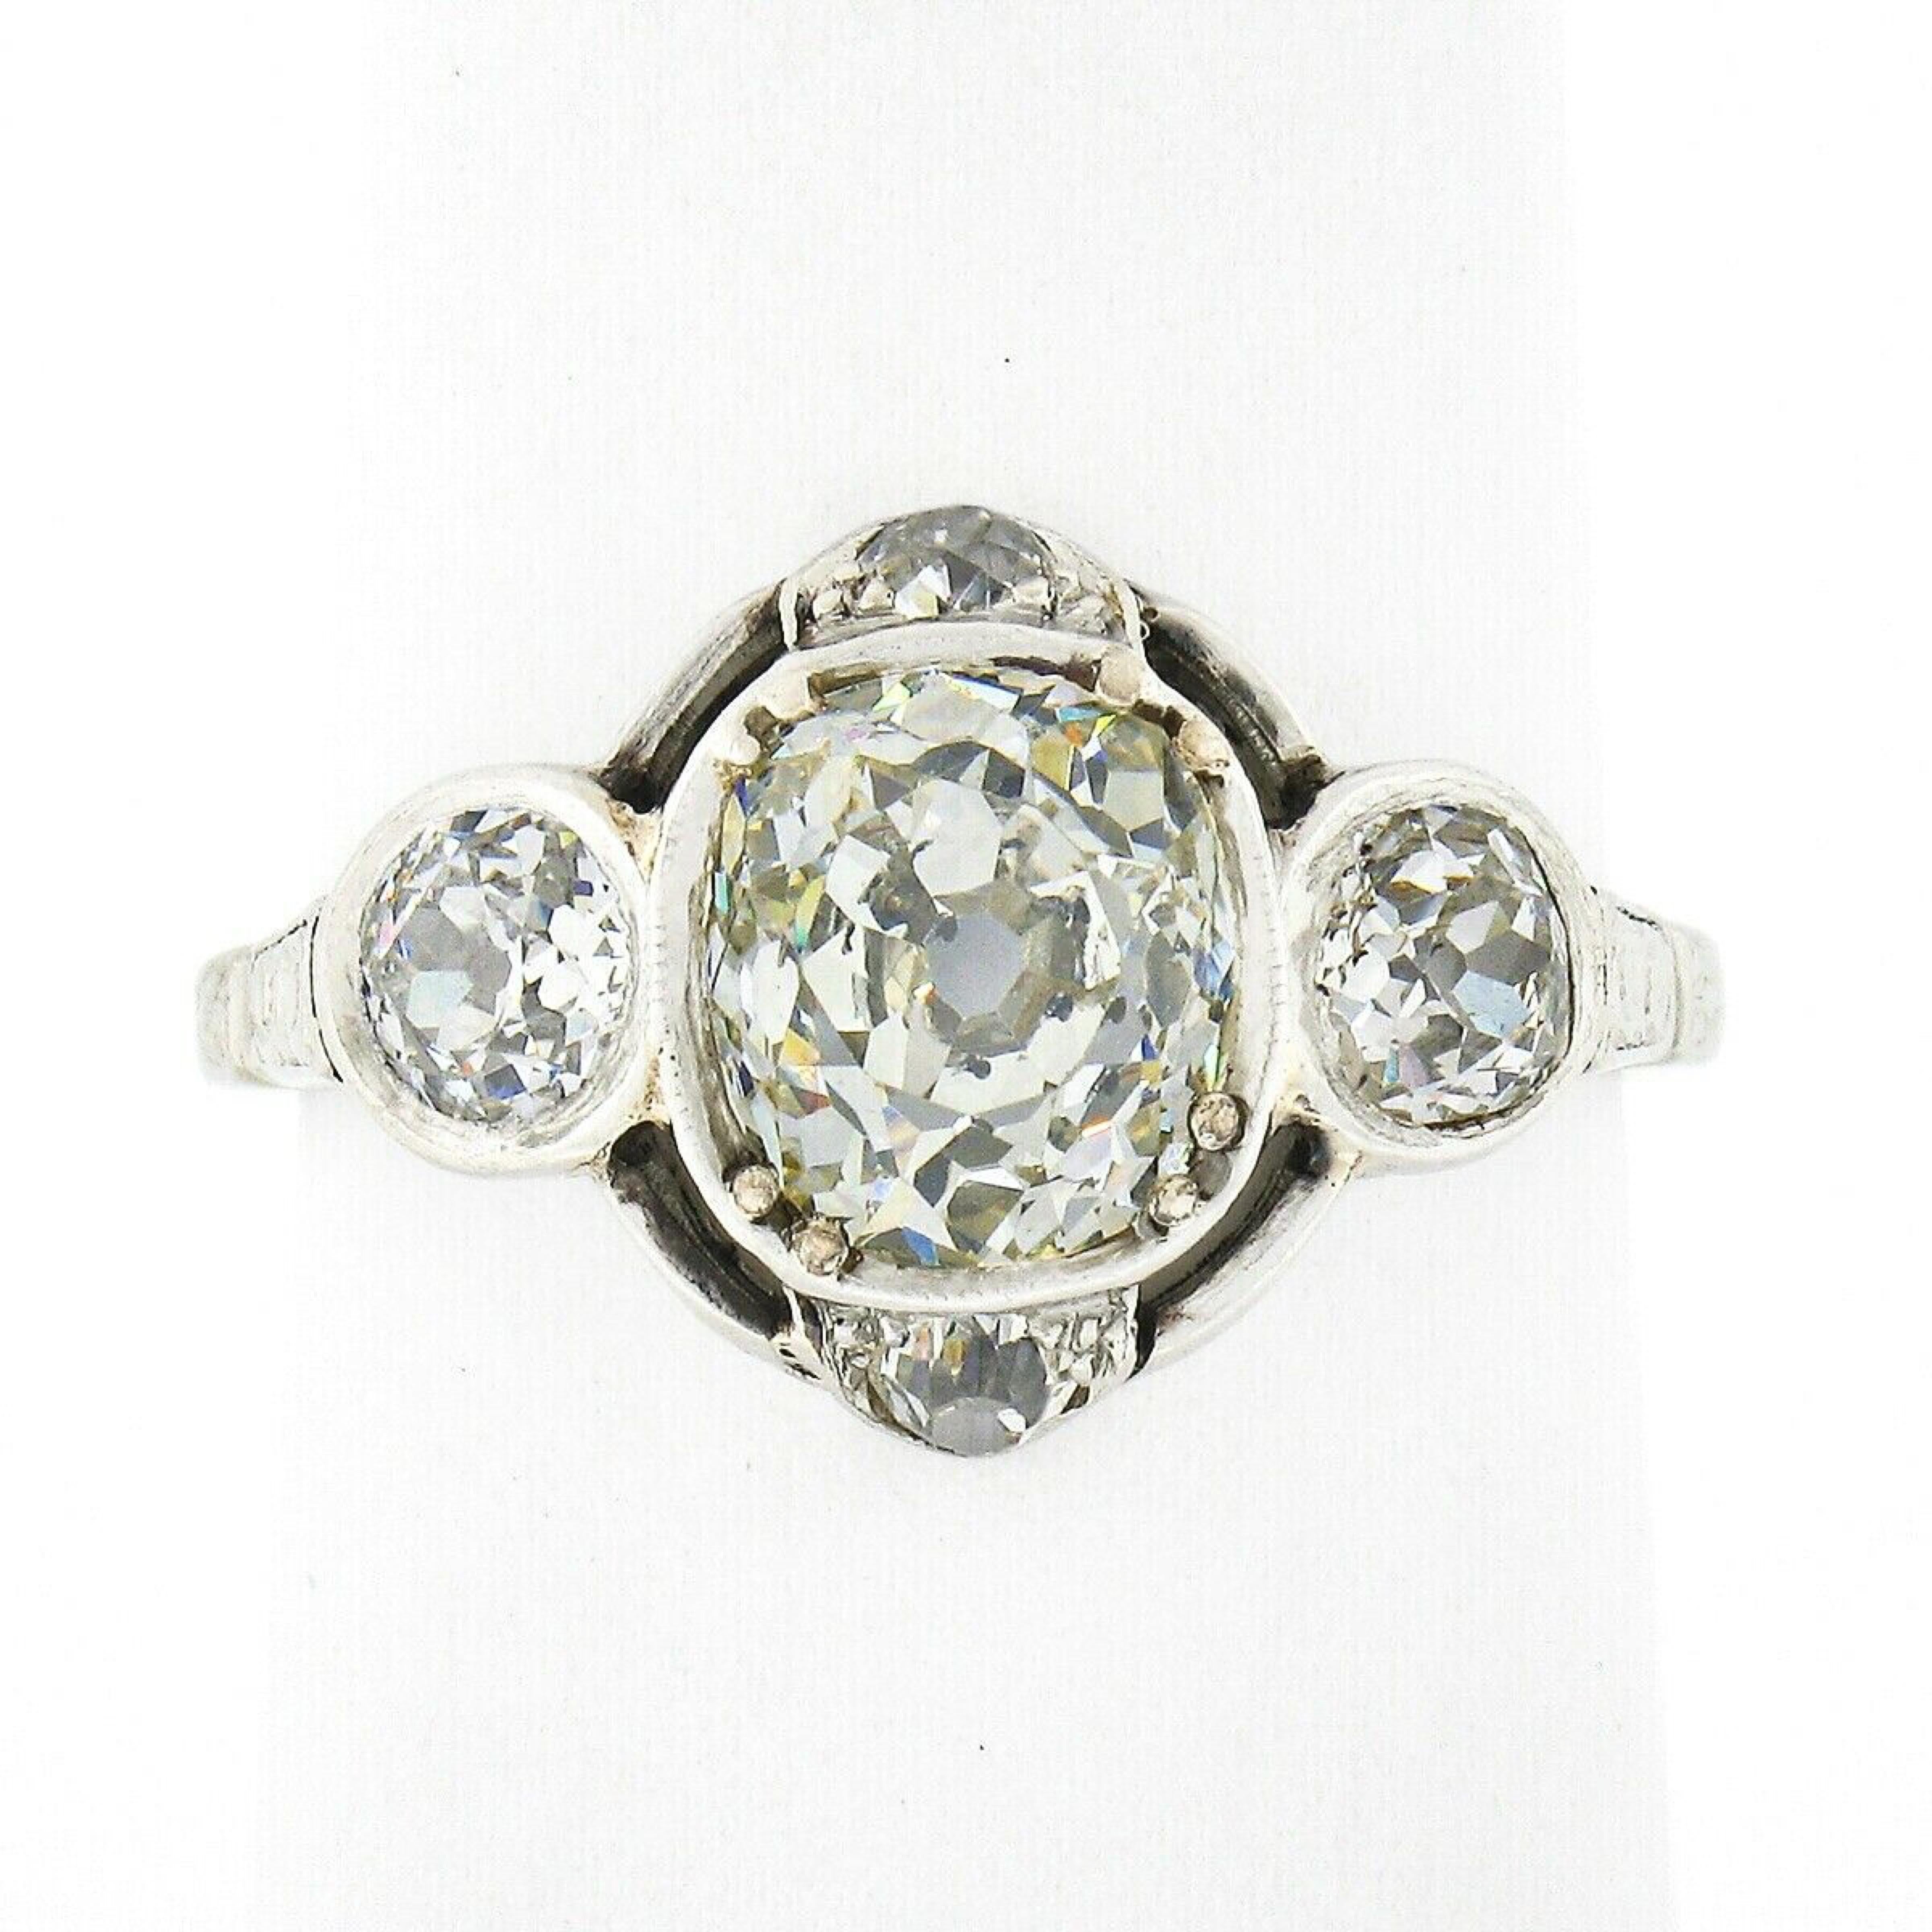 This breathtaking antique diamond engagement ring was crafted from solid platinum during the Edwardian era and features a stunning old mine cut diamond solitaire neatly set at the open center. This gorgeous diamond shows a nice large size with